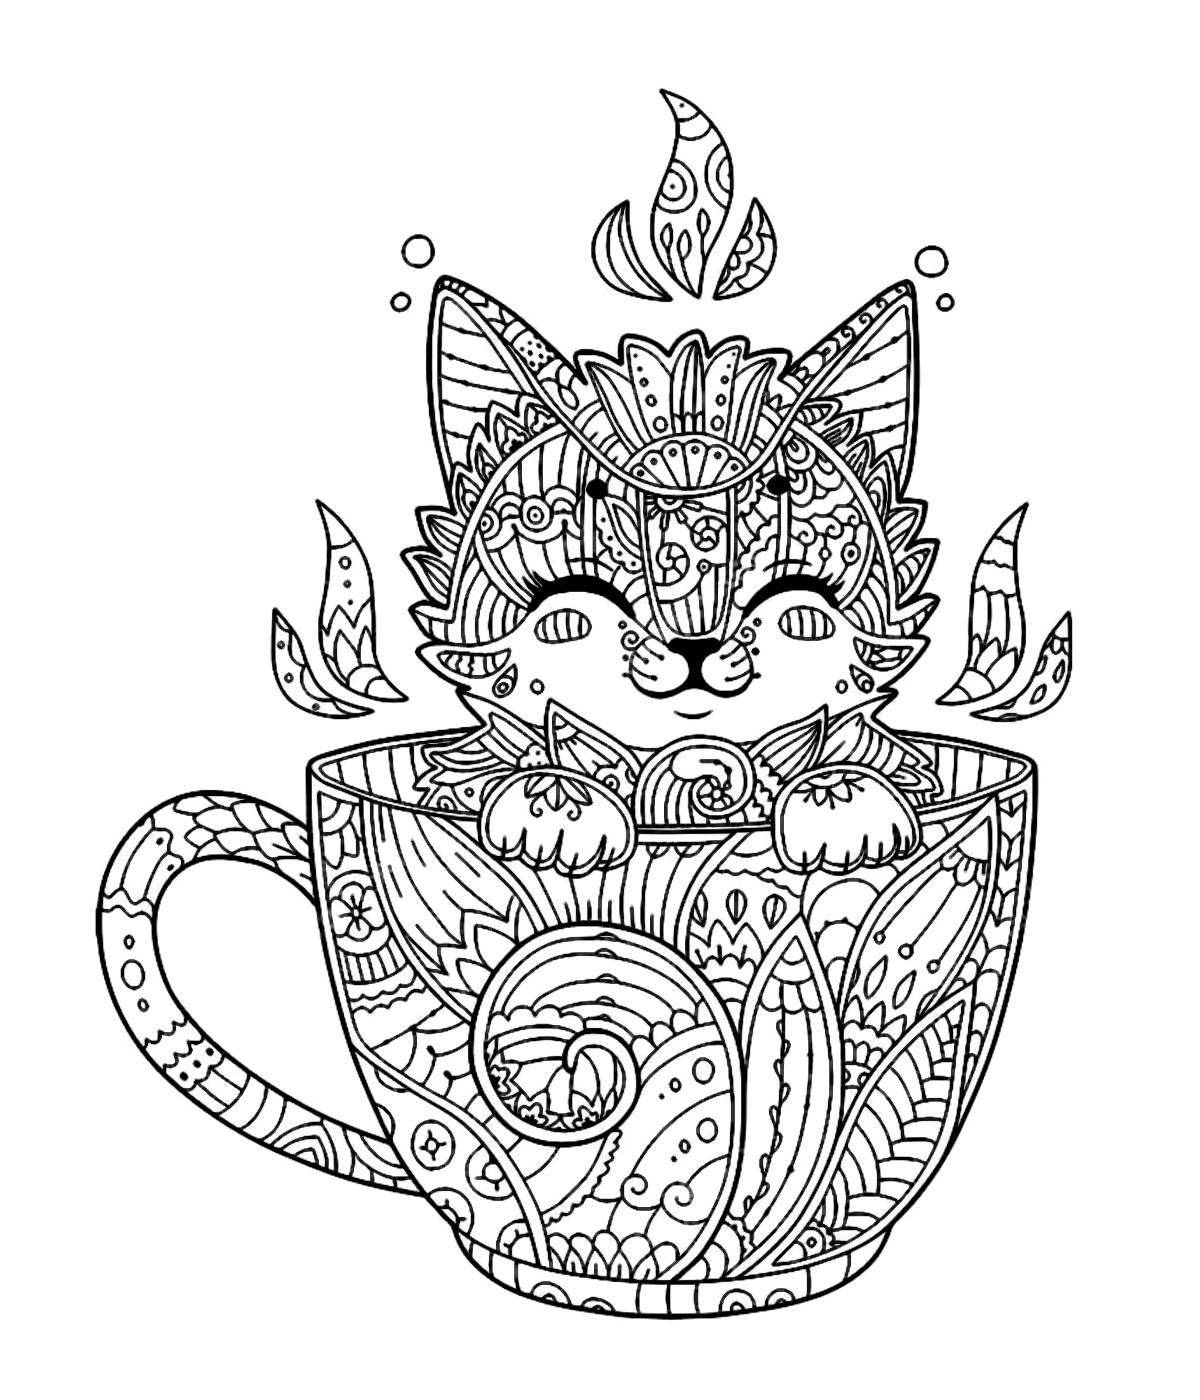 Coloring page playful cat in a mug